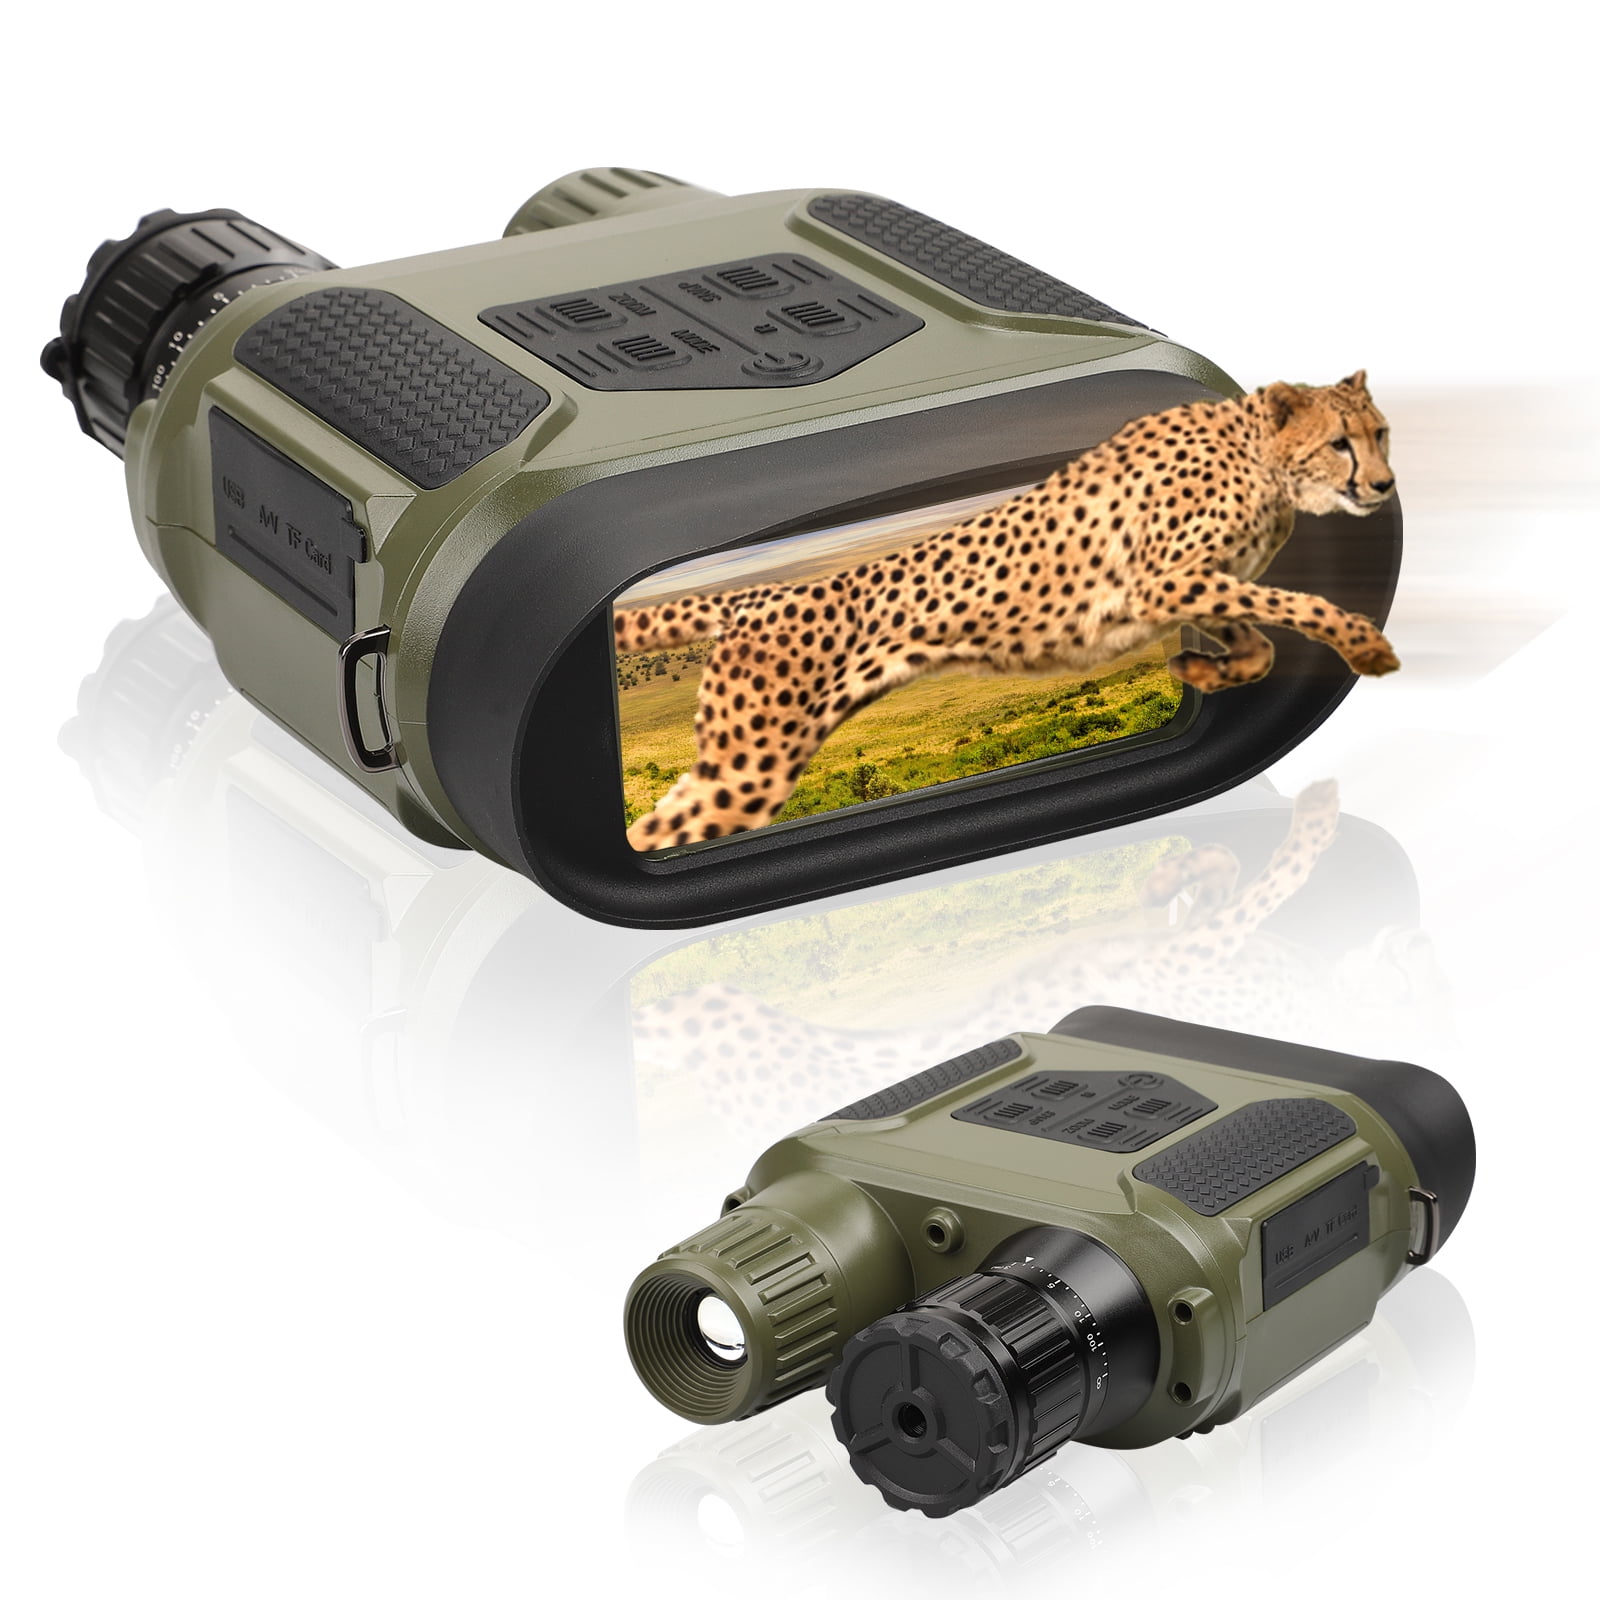 Wildlife Watching Monitoring 32GB MicroSD Card and Card Reader for Day and Night Hunting Coolife Night Vision Goggles Night Vision Binoculars IR with Video and Photo Night Vision with Flashlight